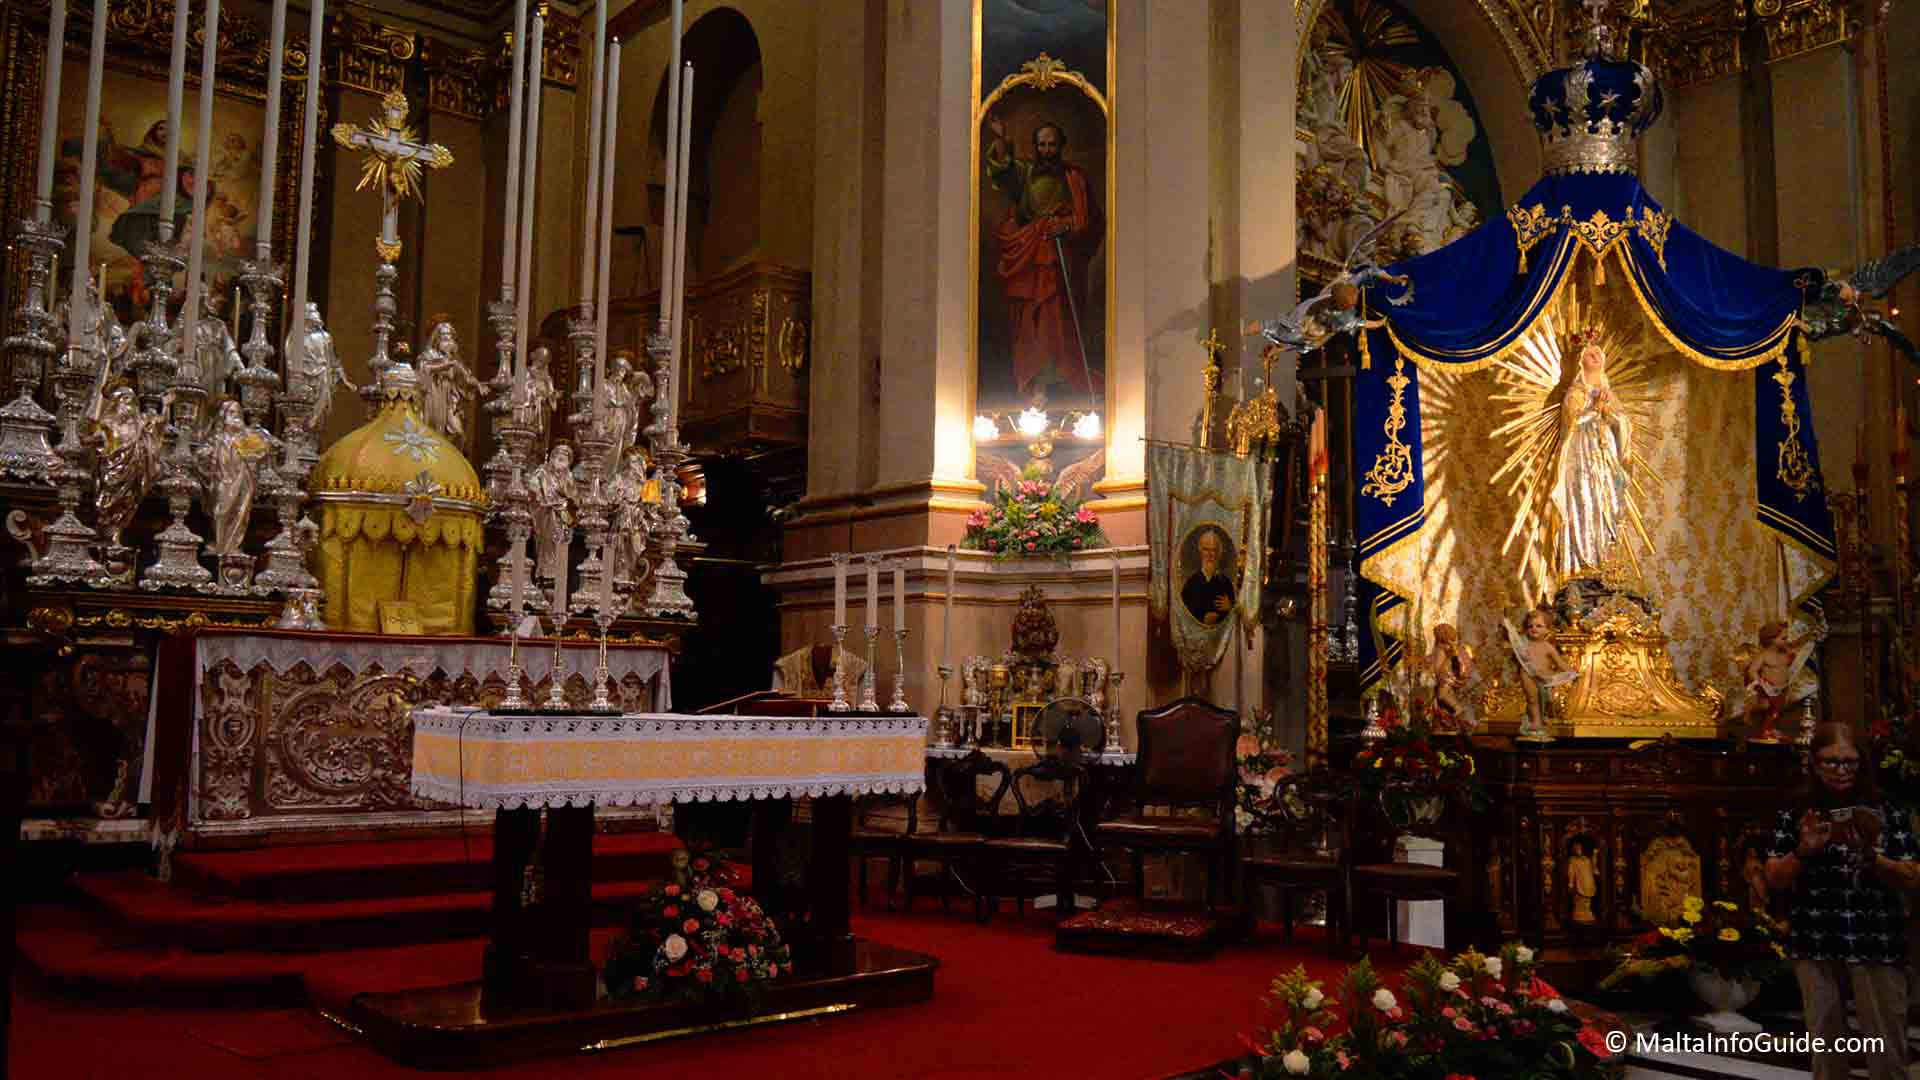 Decorations inside the church